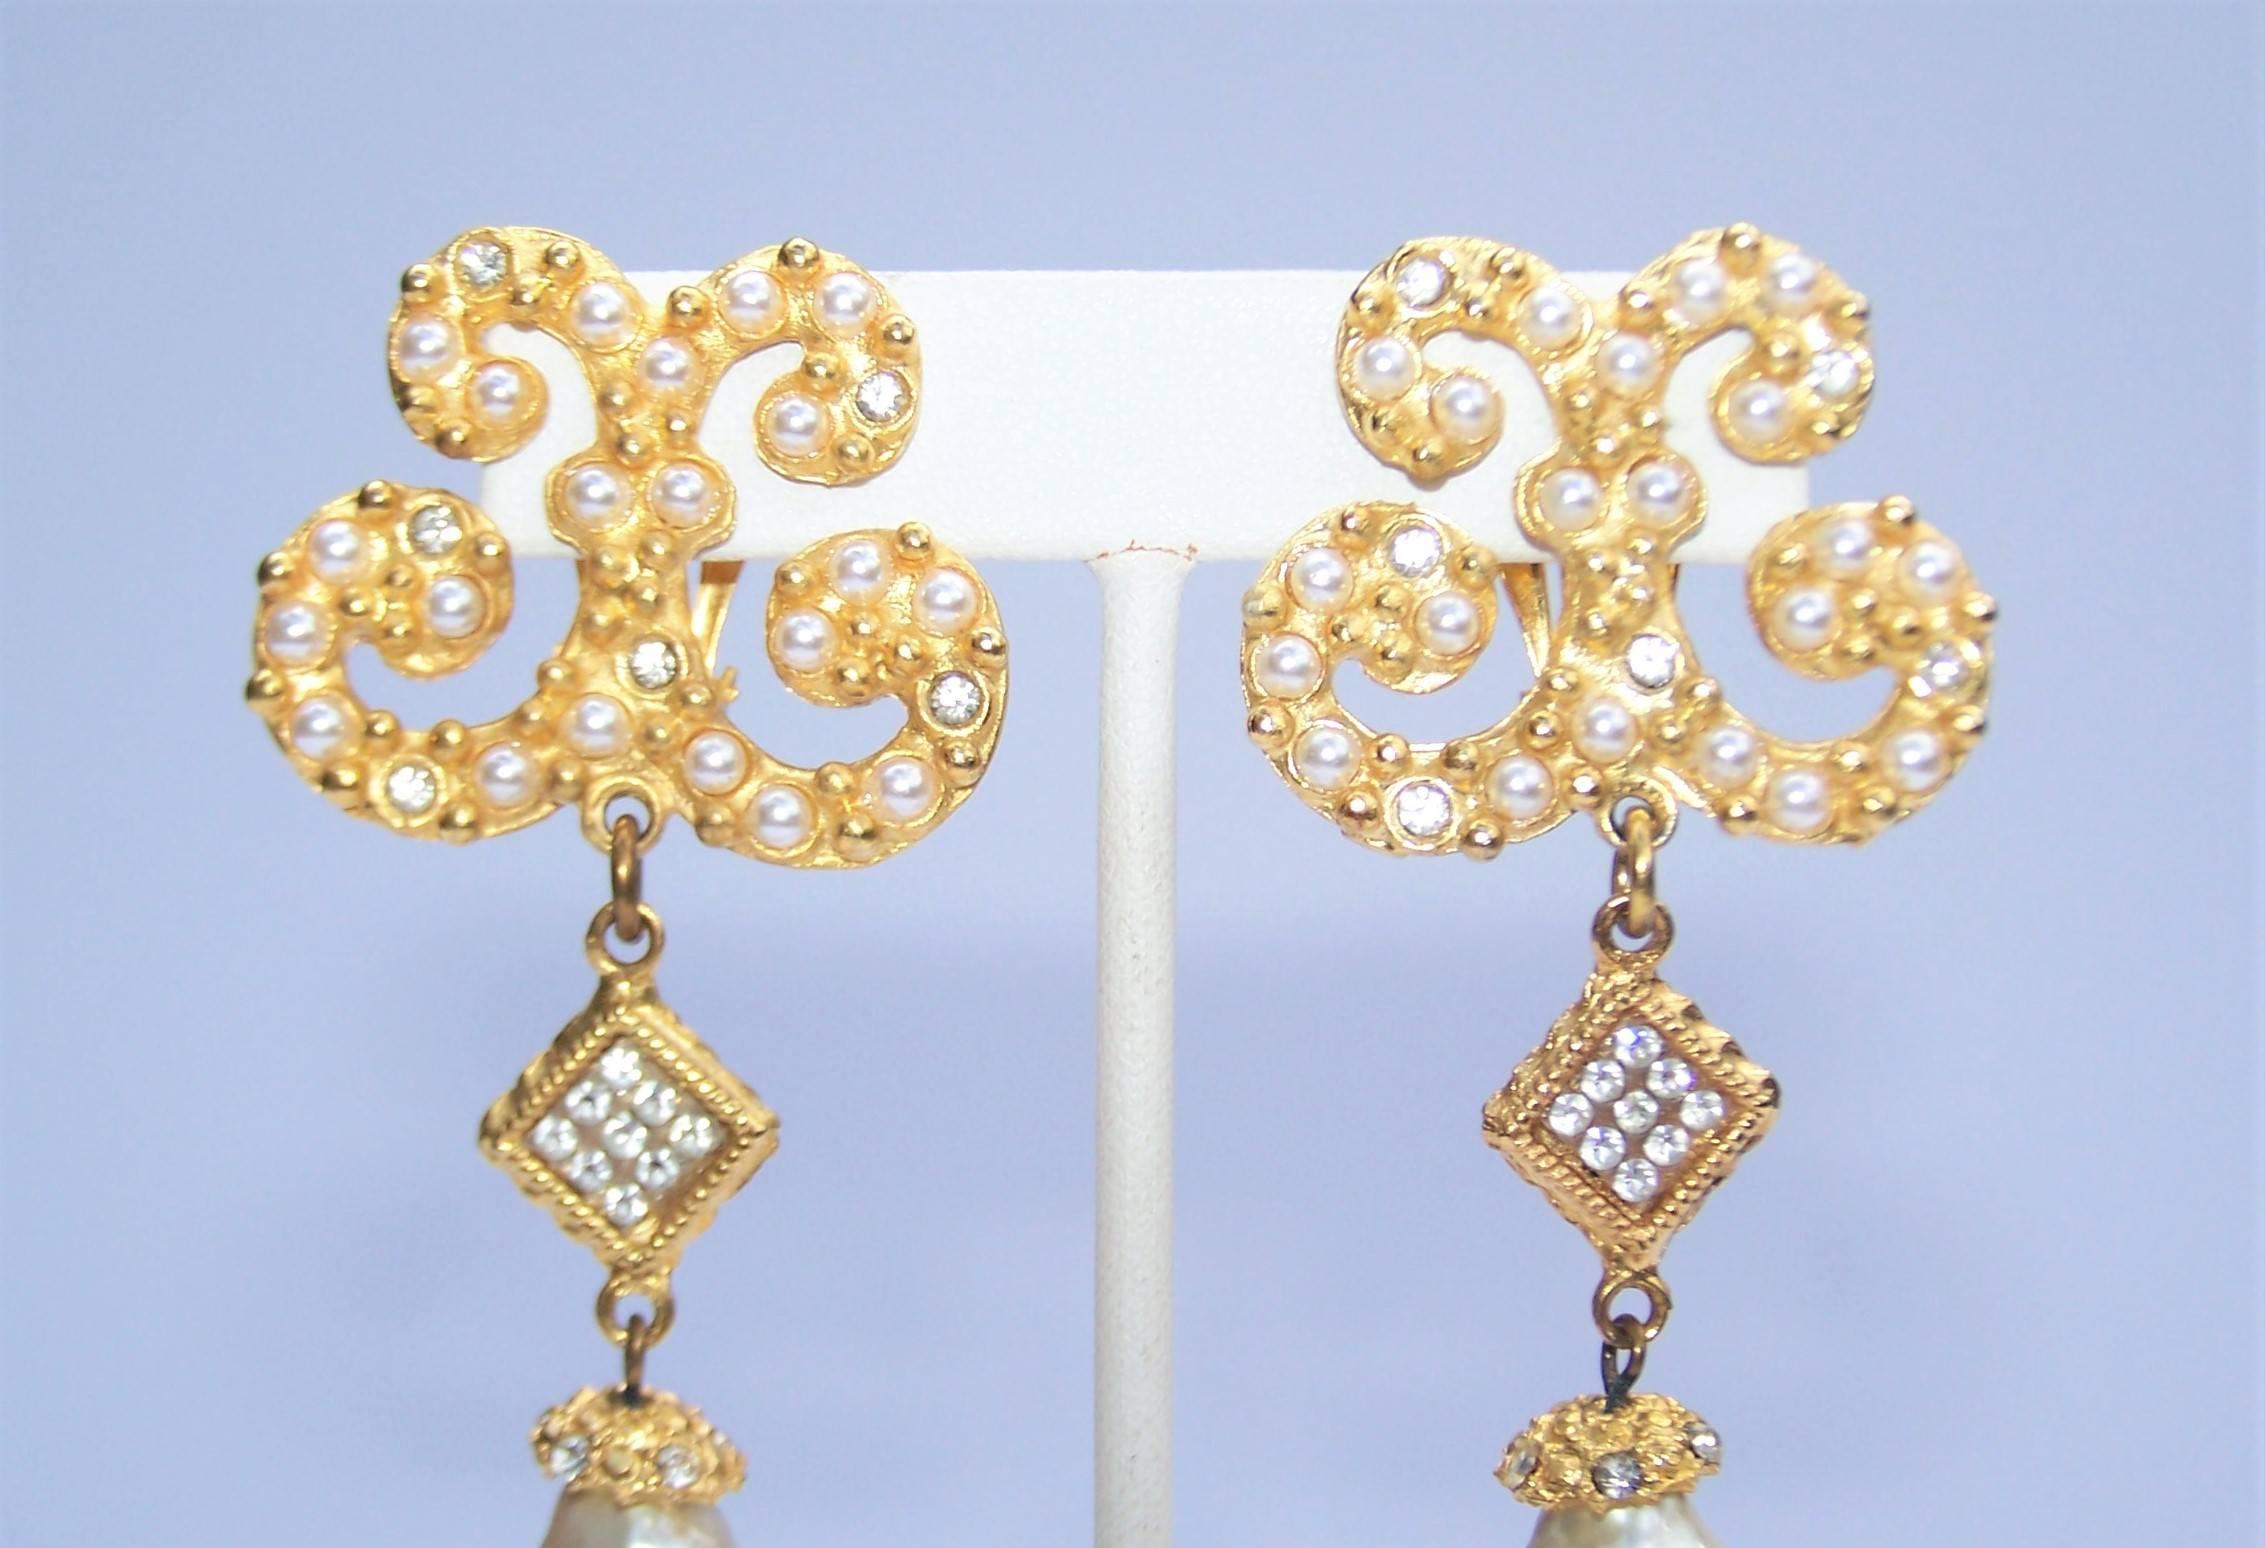 Glamorize your look with these 1980's goldtone dangle earrings embellished with faux pearls and crystal rhinestones by Gerard Yosca.  Mr. Yosca is known for his high quality artisan jewelry and continues to design beautiful pieces today.  The base